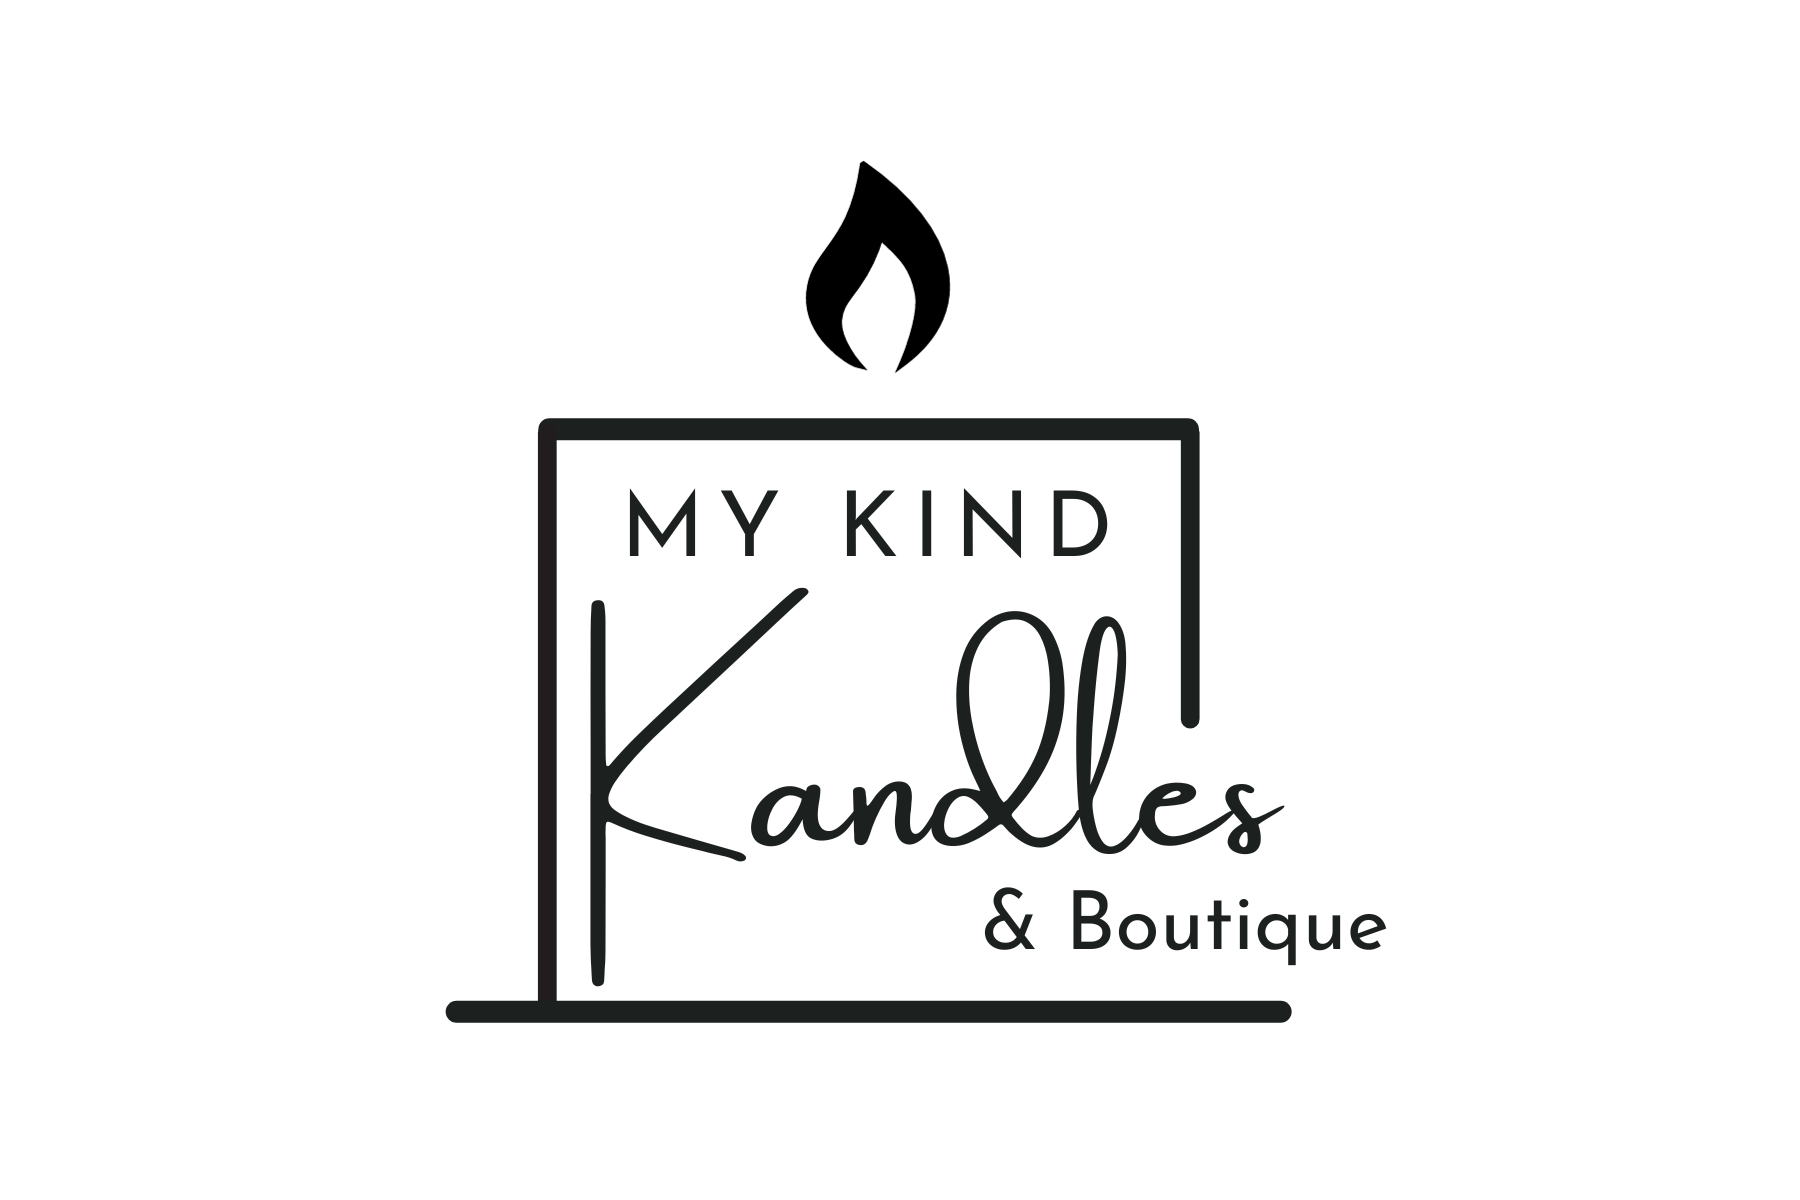 My Kind Kandles & Boutique 